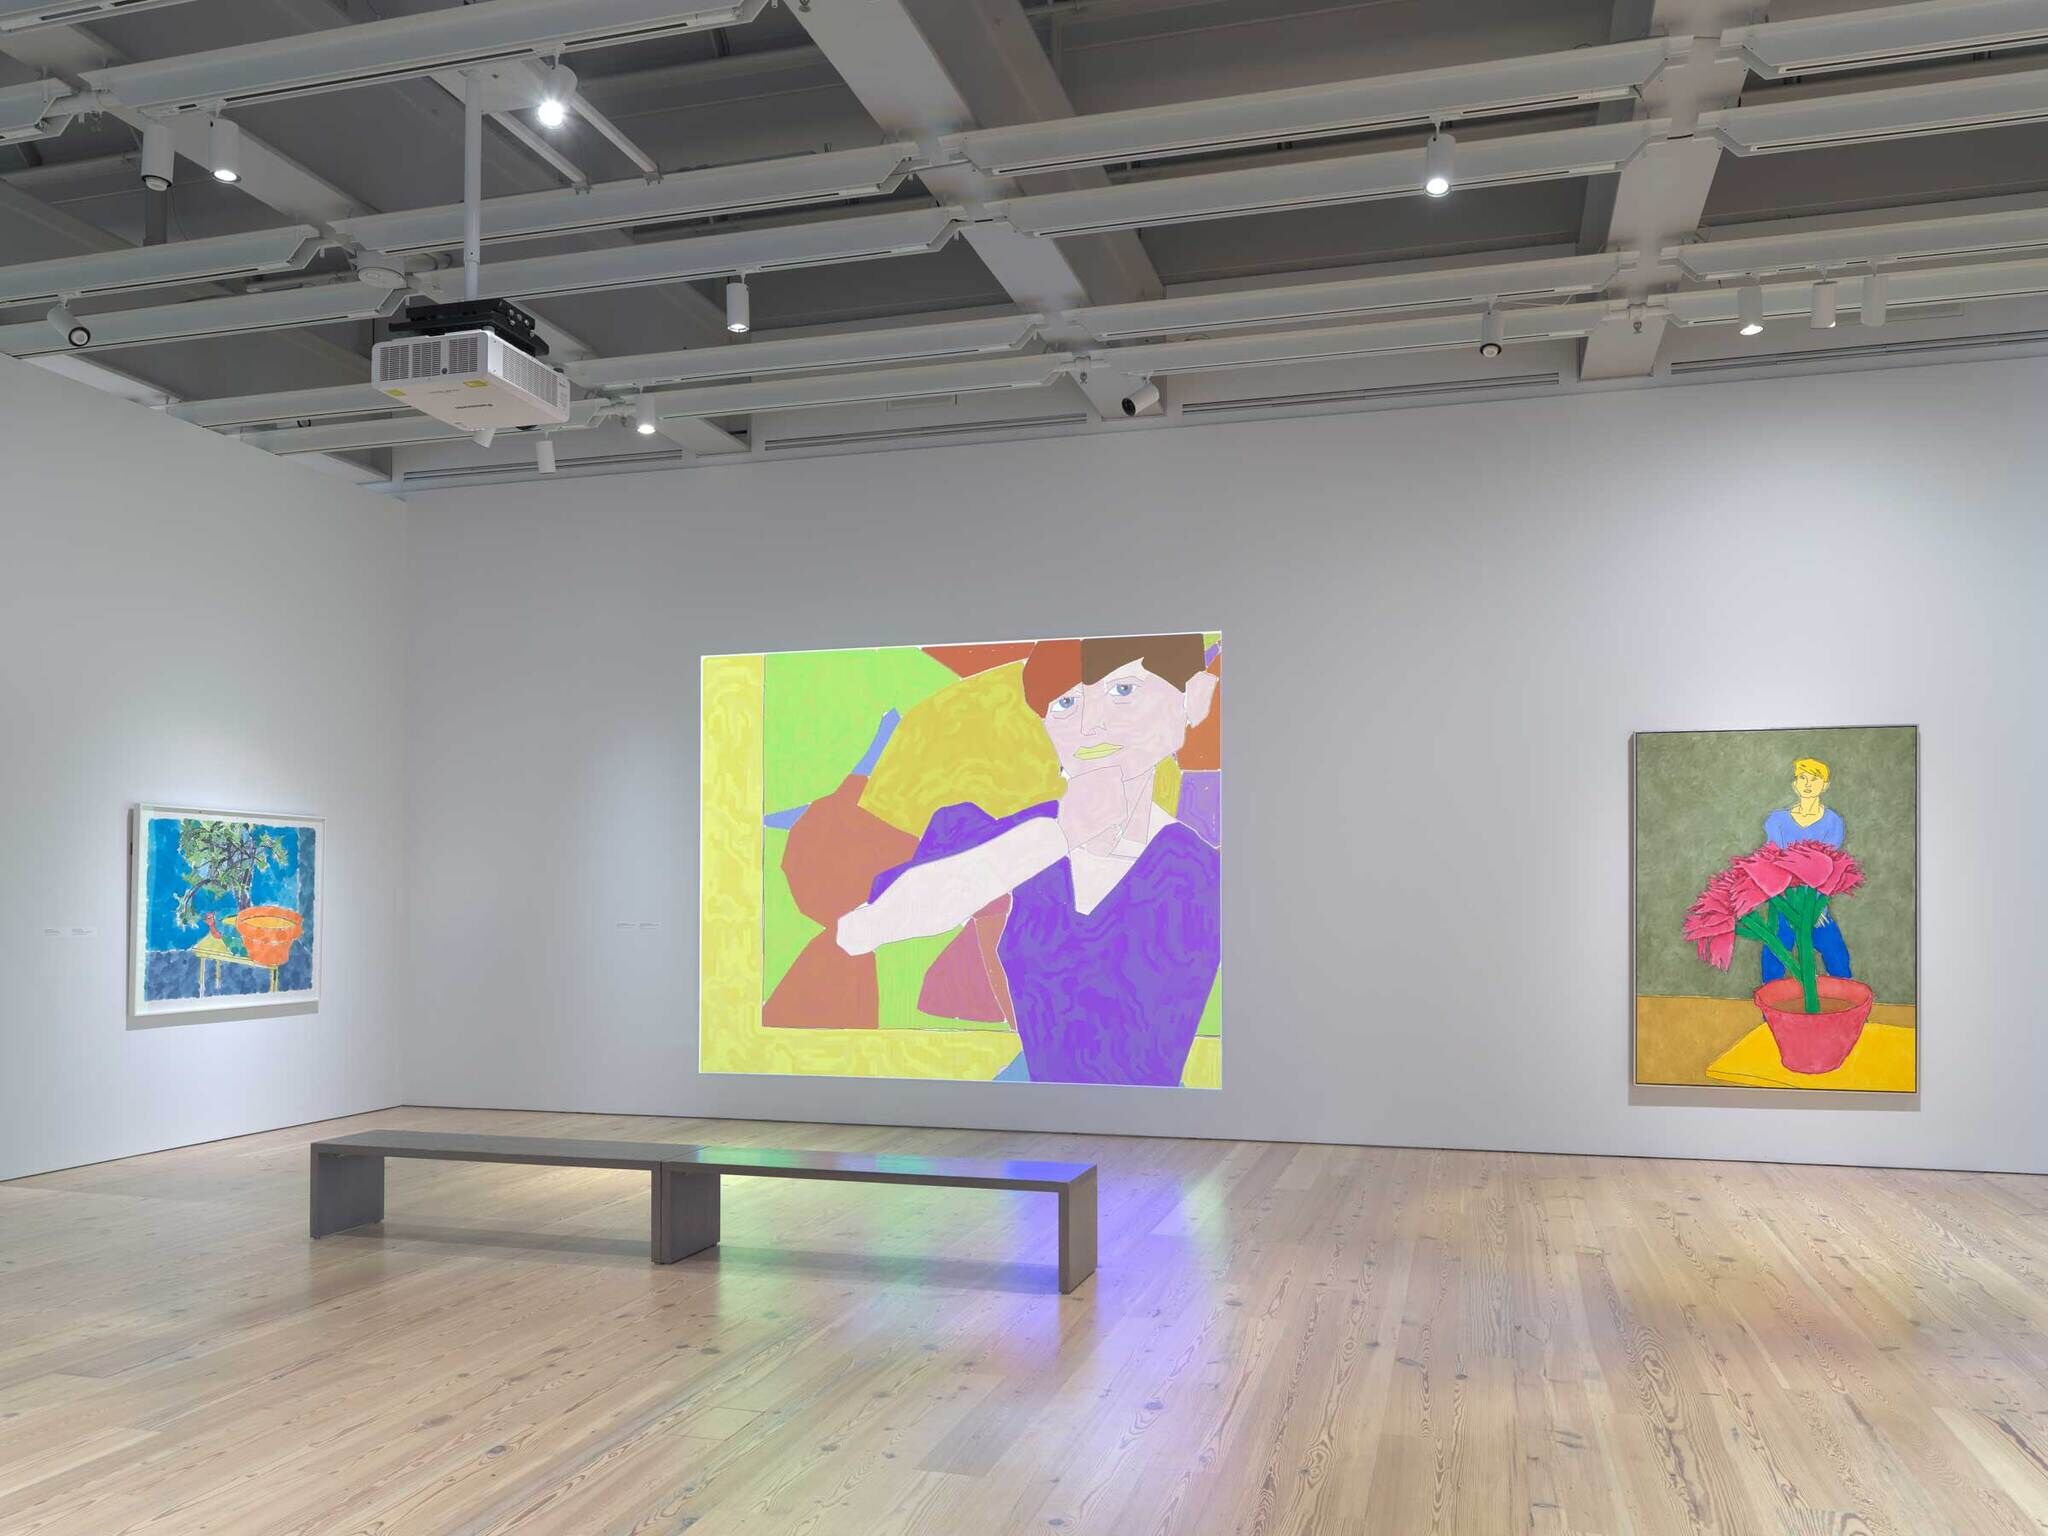 Modern art gallery interior with colorful abstract paintings on white walls, wooden floors, and a bench in the center.